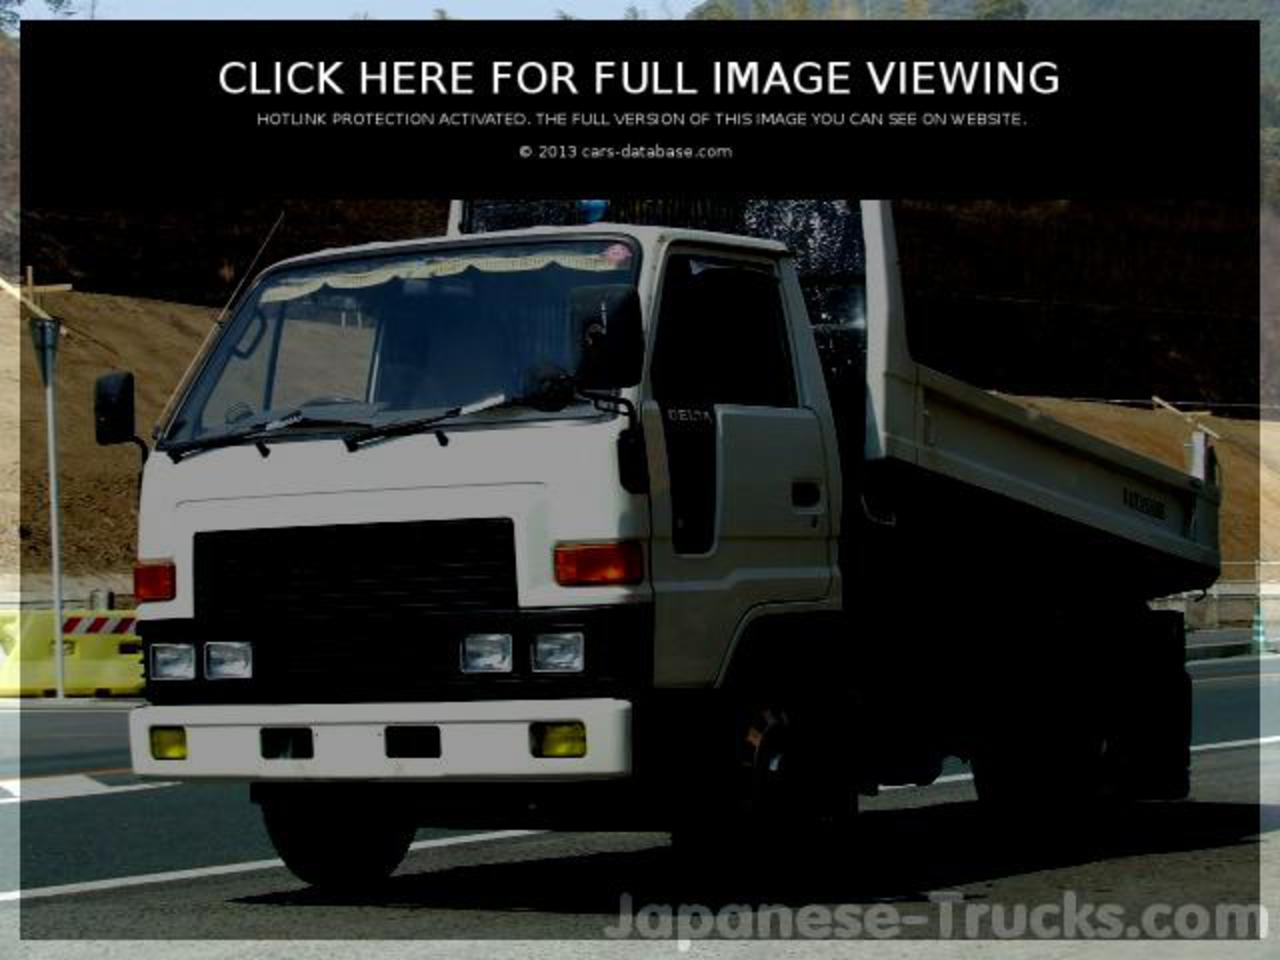 Daihatsu Delta: Information about model, images gallery and ...